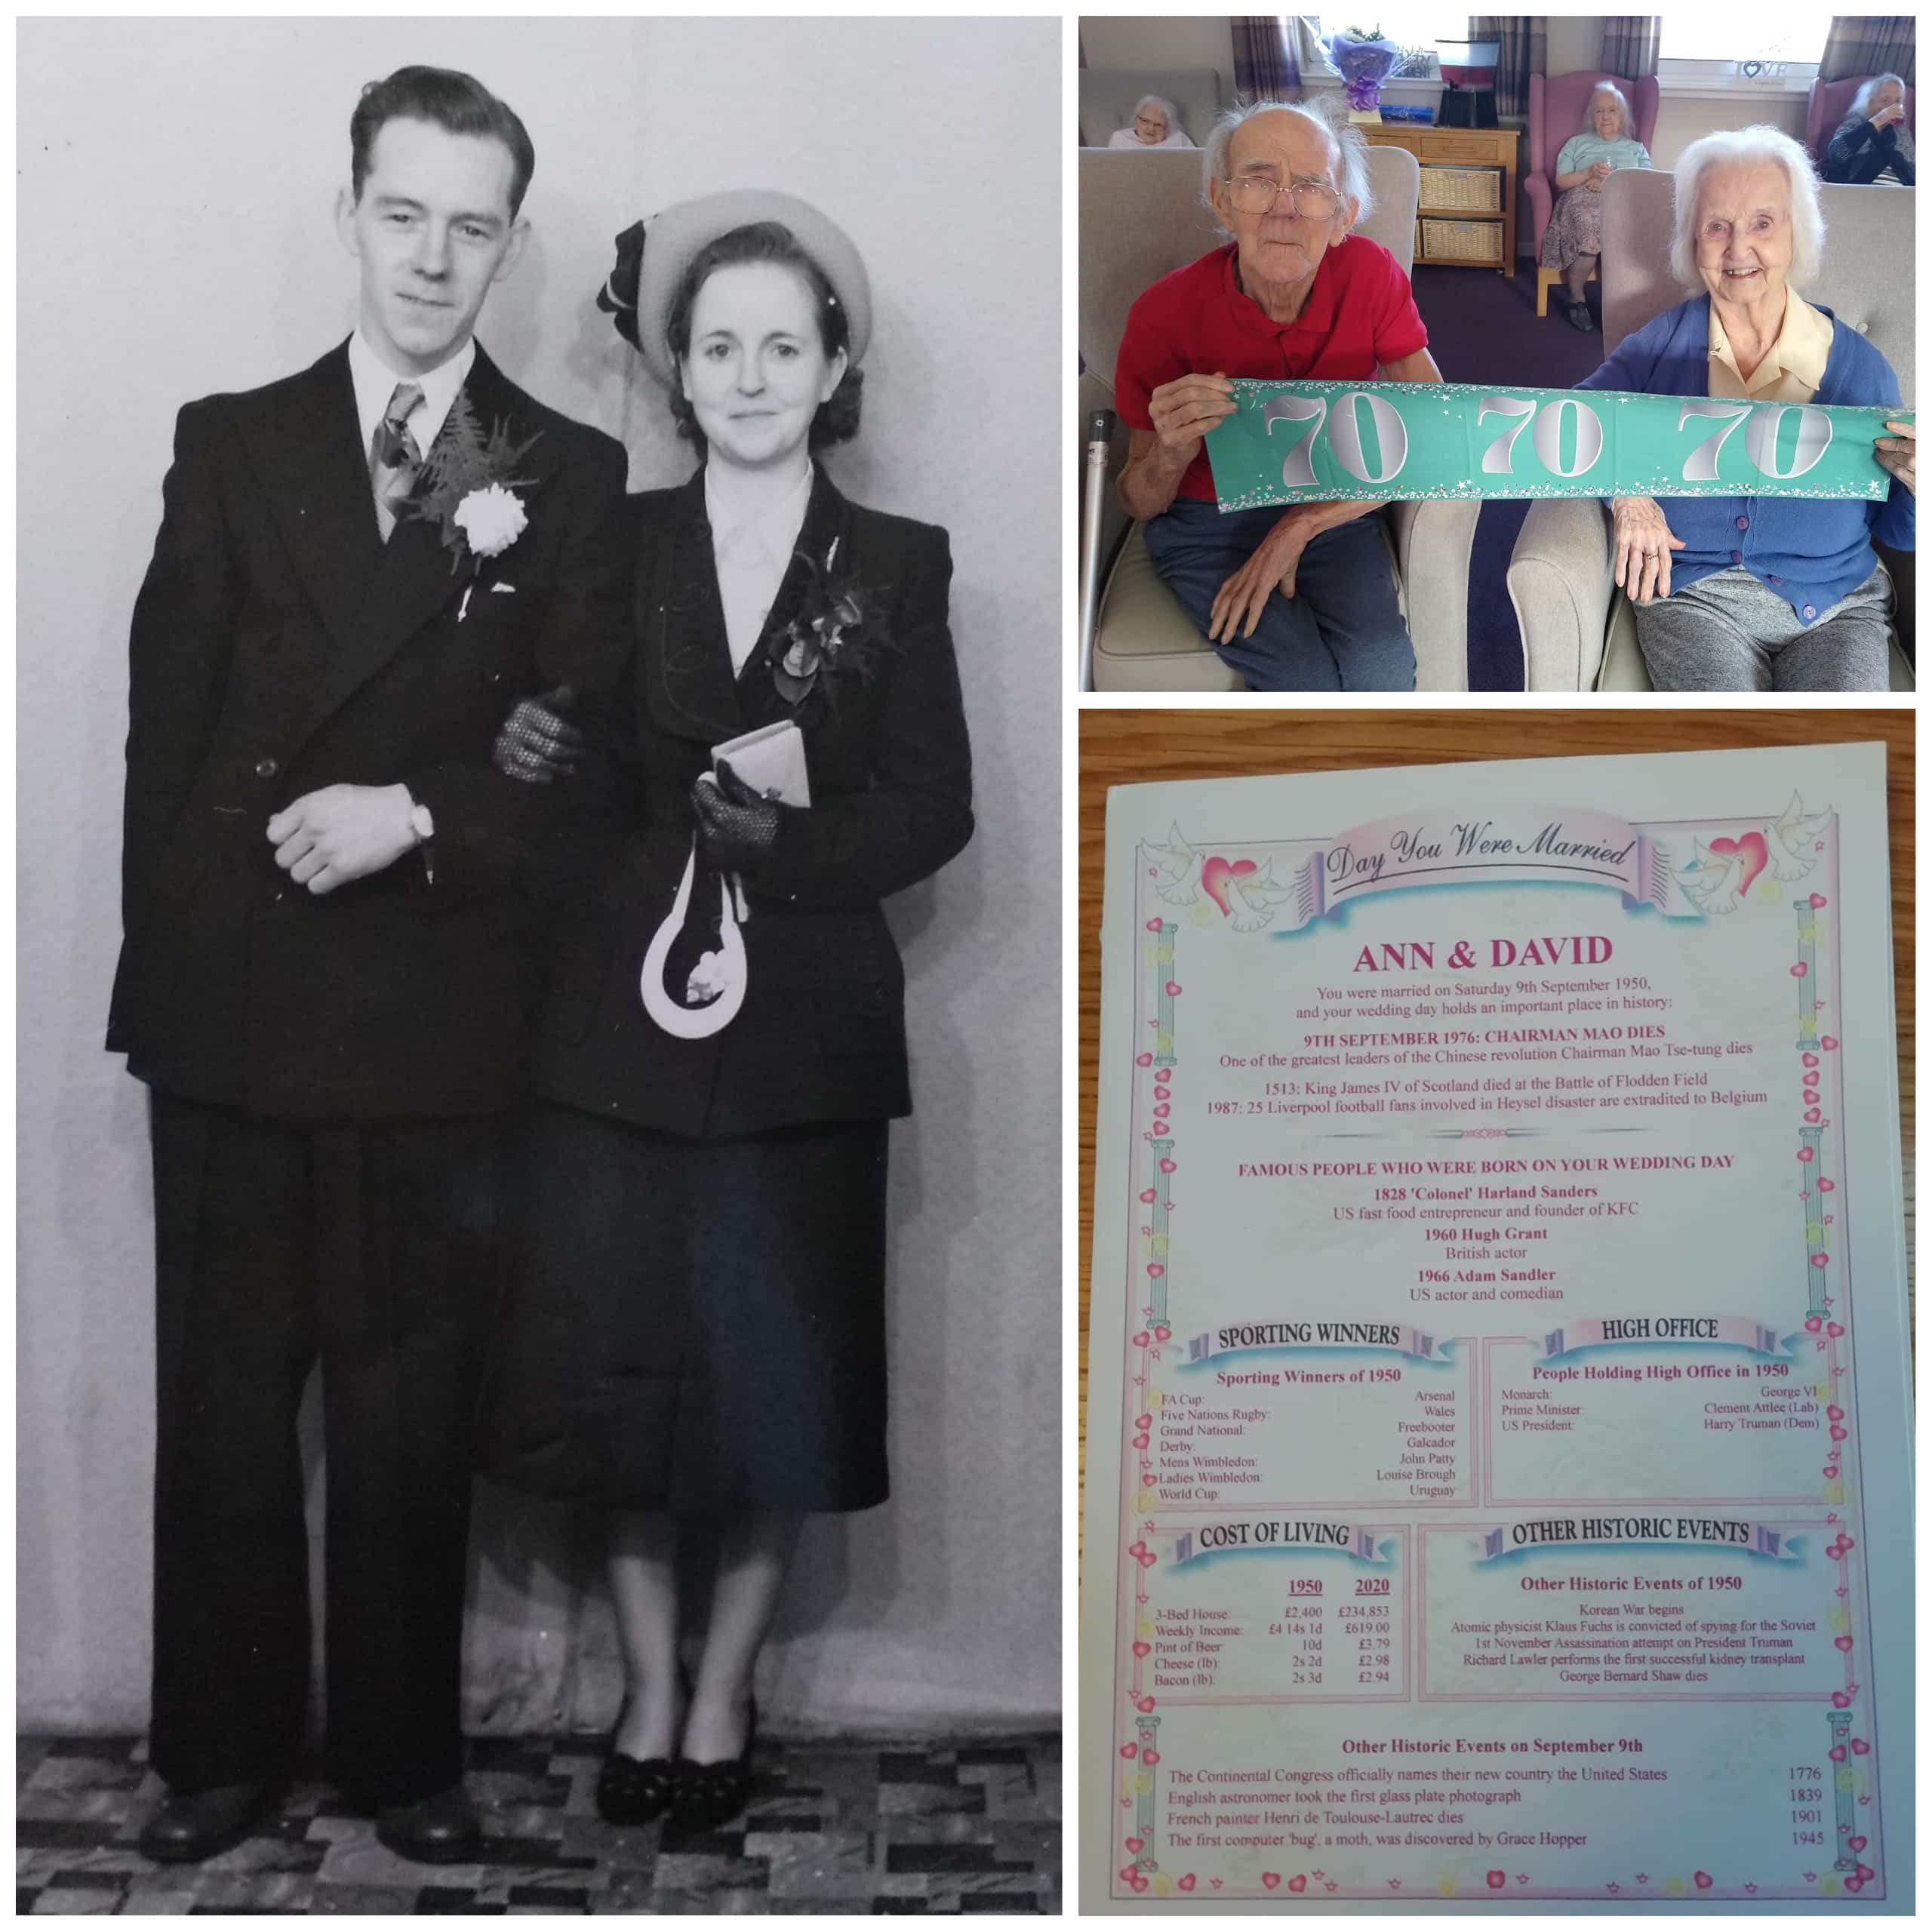 David and Anne Taylor, residents of Kingsgate Care Home in East Kilbride, celebrate their 70th wedding anniversary.